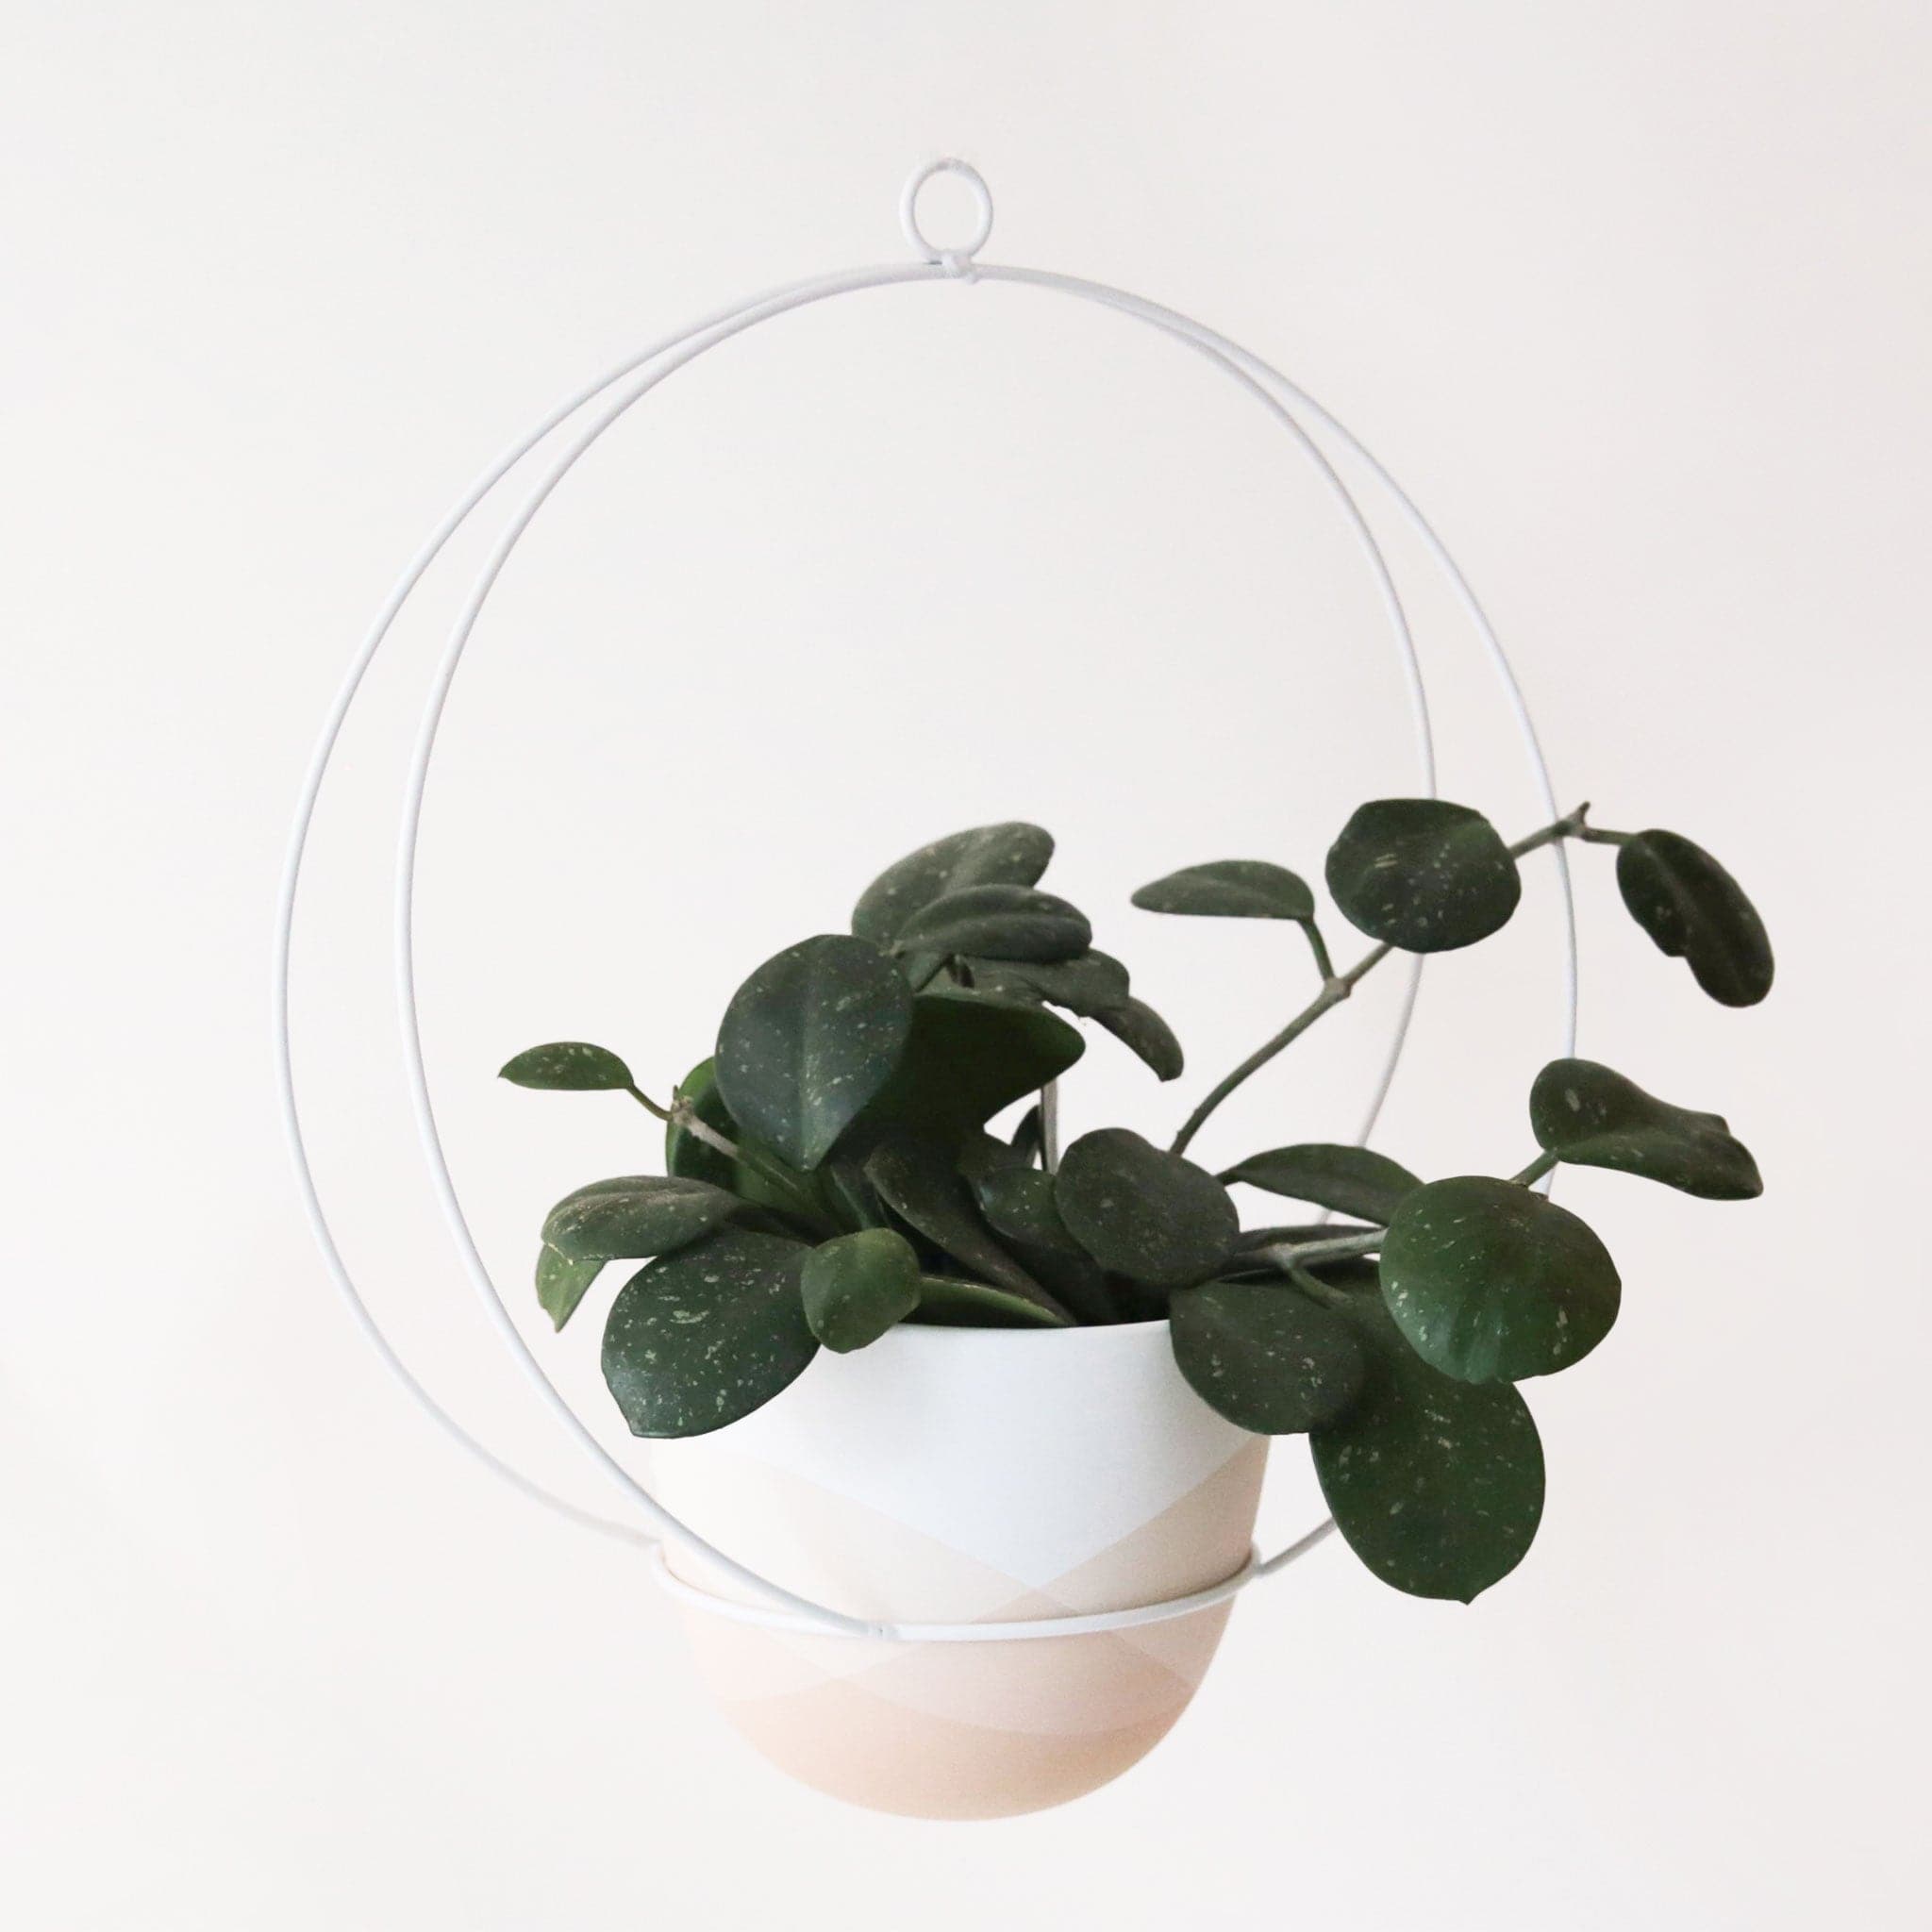 The simple silhouette of the Cloud Hanging Planter combines a stylish ombre finished pot with a white metal hanger to make a stunning backdrop for all your hanging plants.